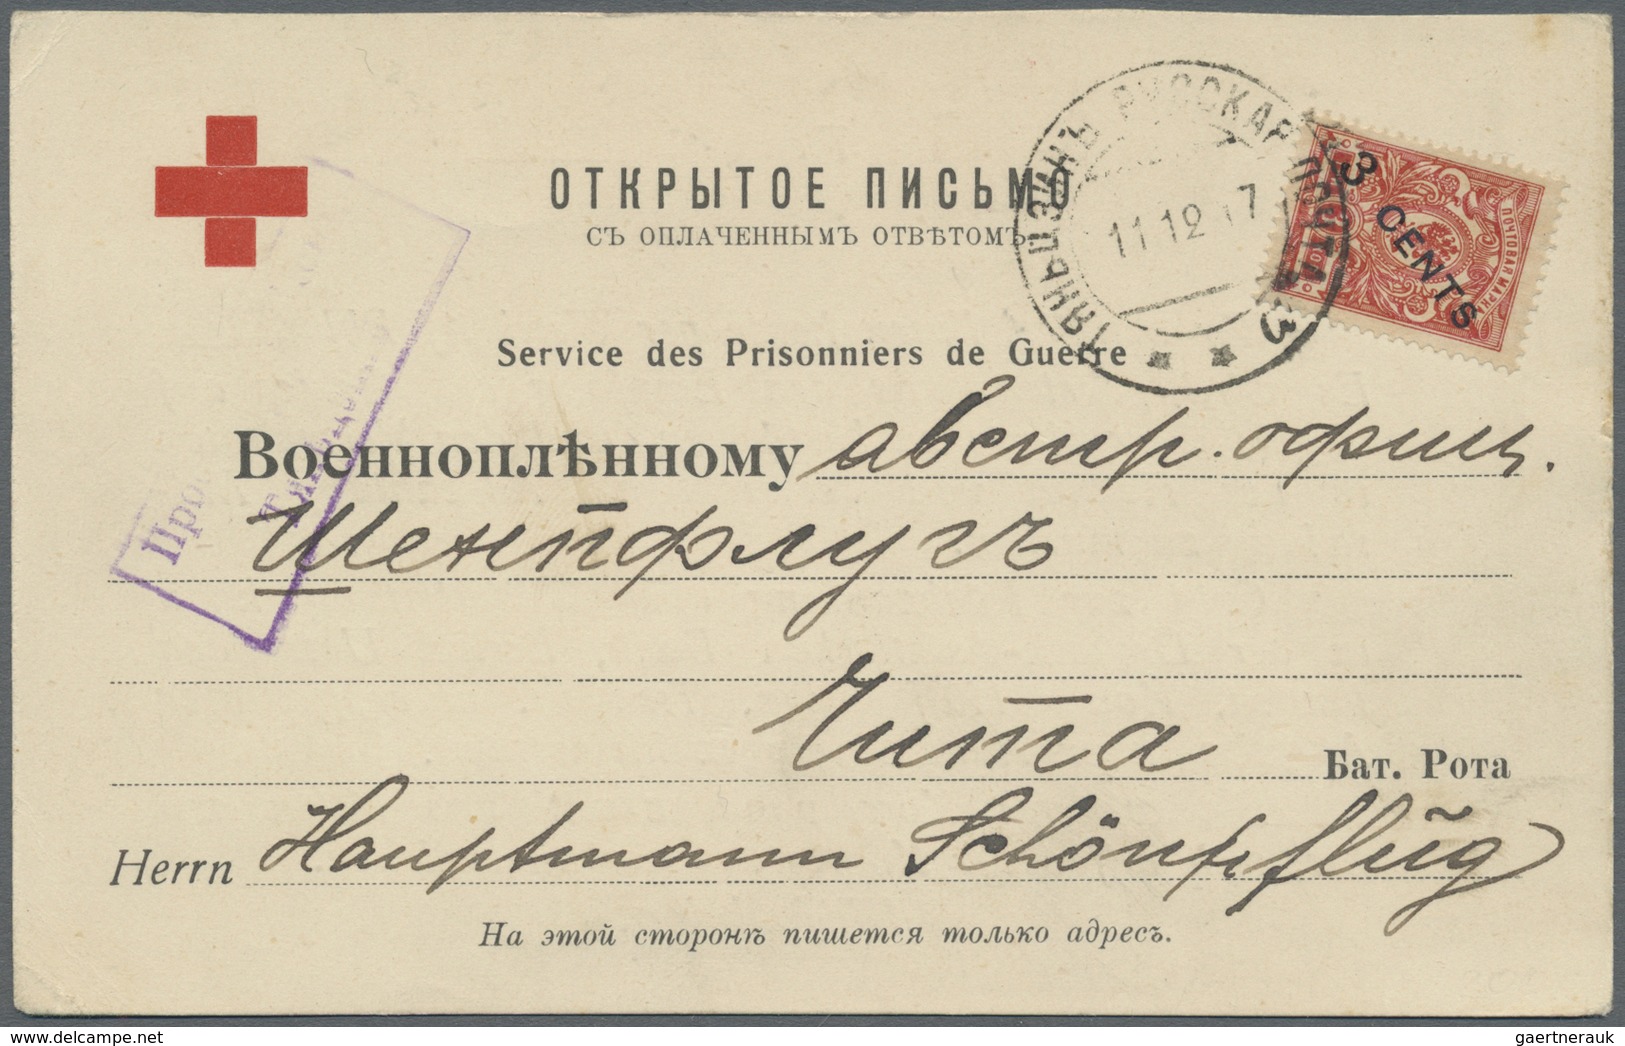 Br Russische Post In China: 1917, 3 C./4 K. Tied "TIENTSIN RUSSIAN POST 11 12 17" To Preprinted Card (a - Chine